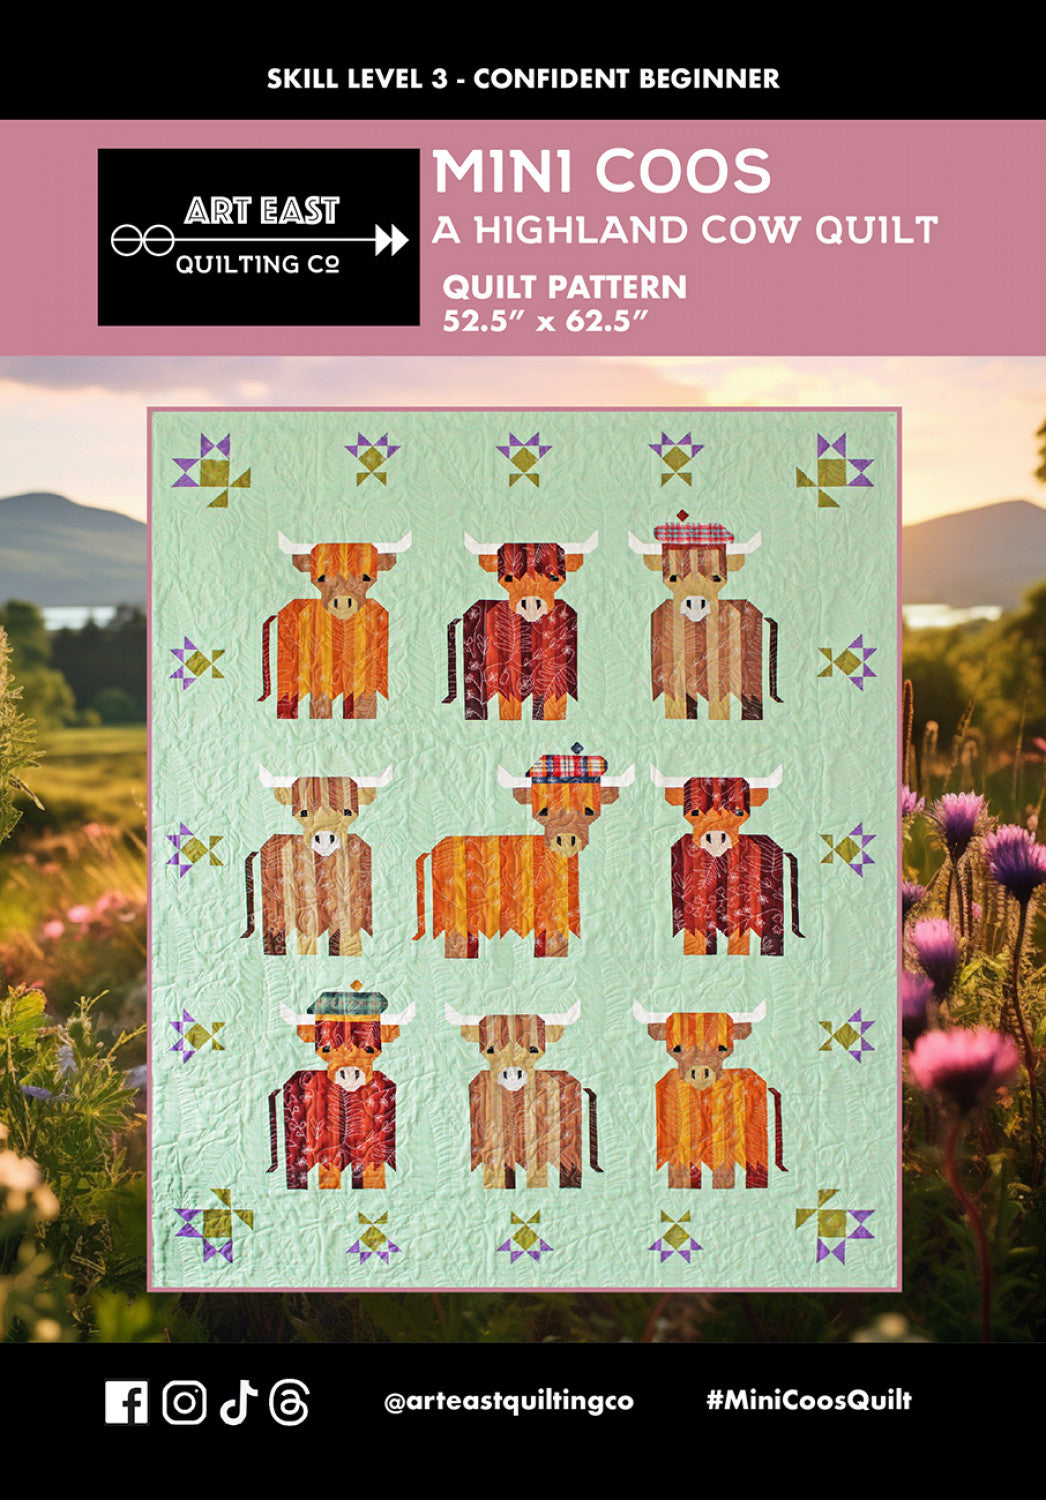 Mini Coos A Highland Cow Quilt Pattern from Art East Quilting